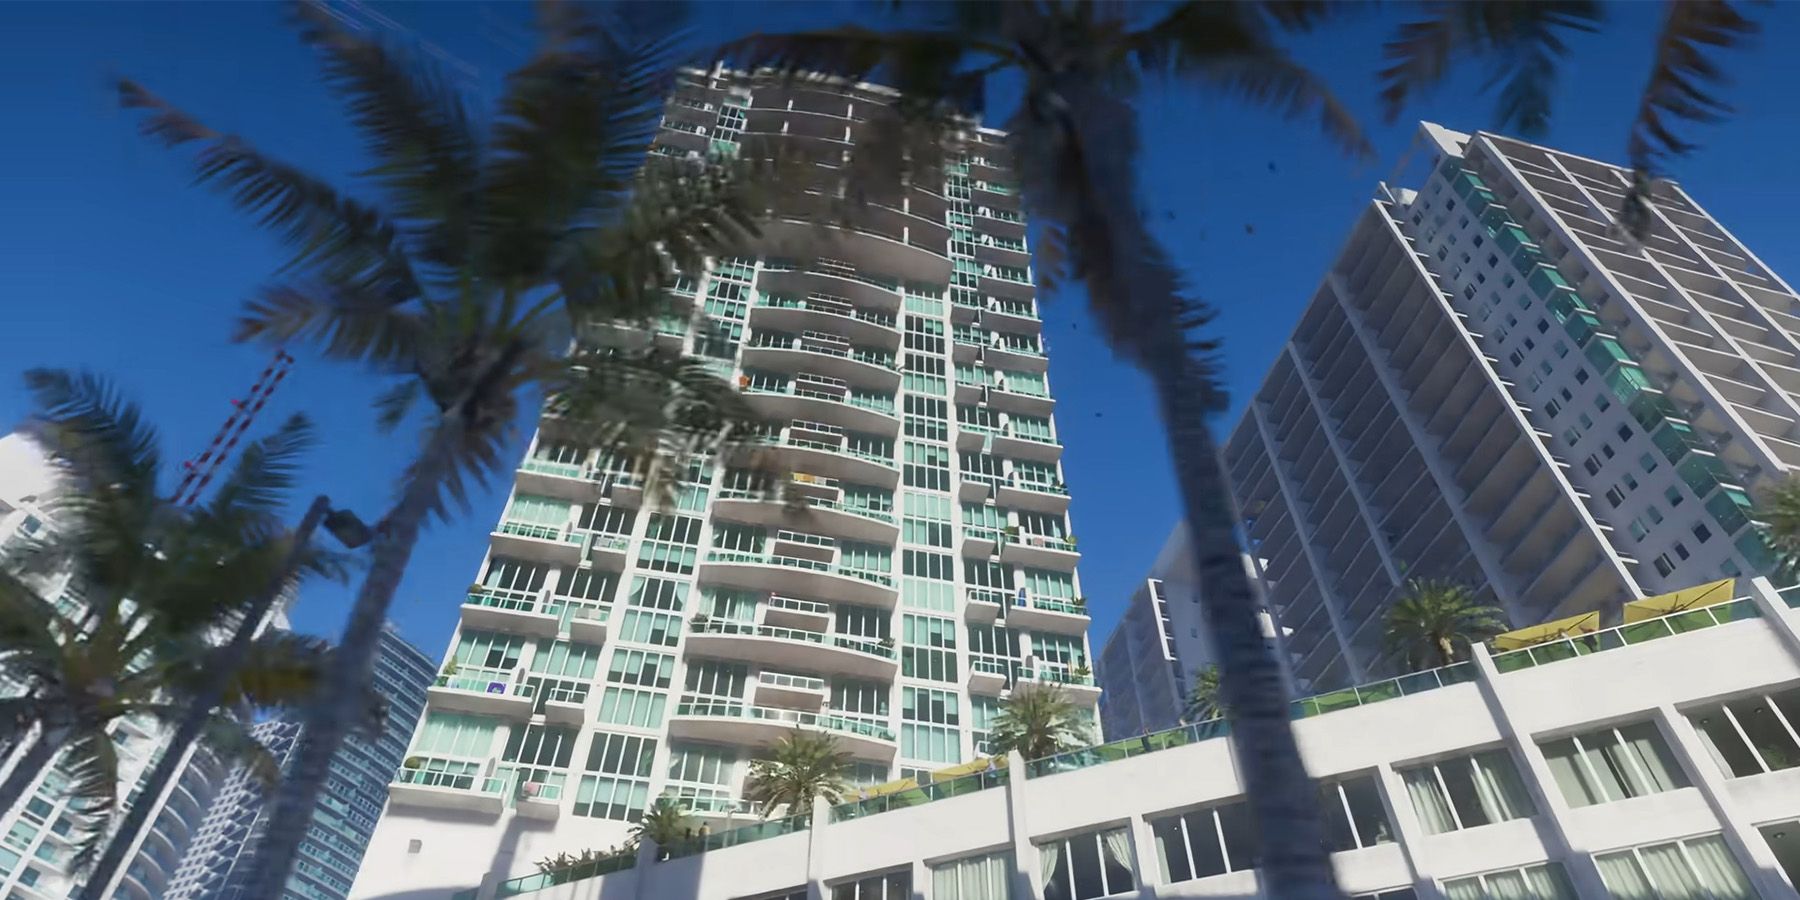 Tall hotel buildings behind palm trees in GTA 6.